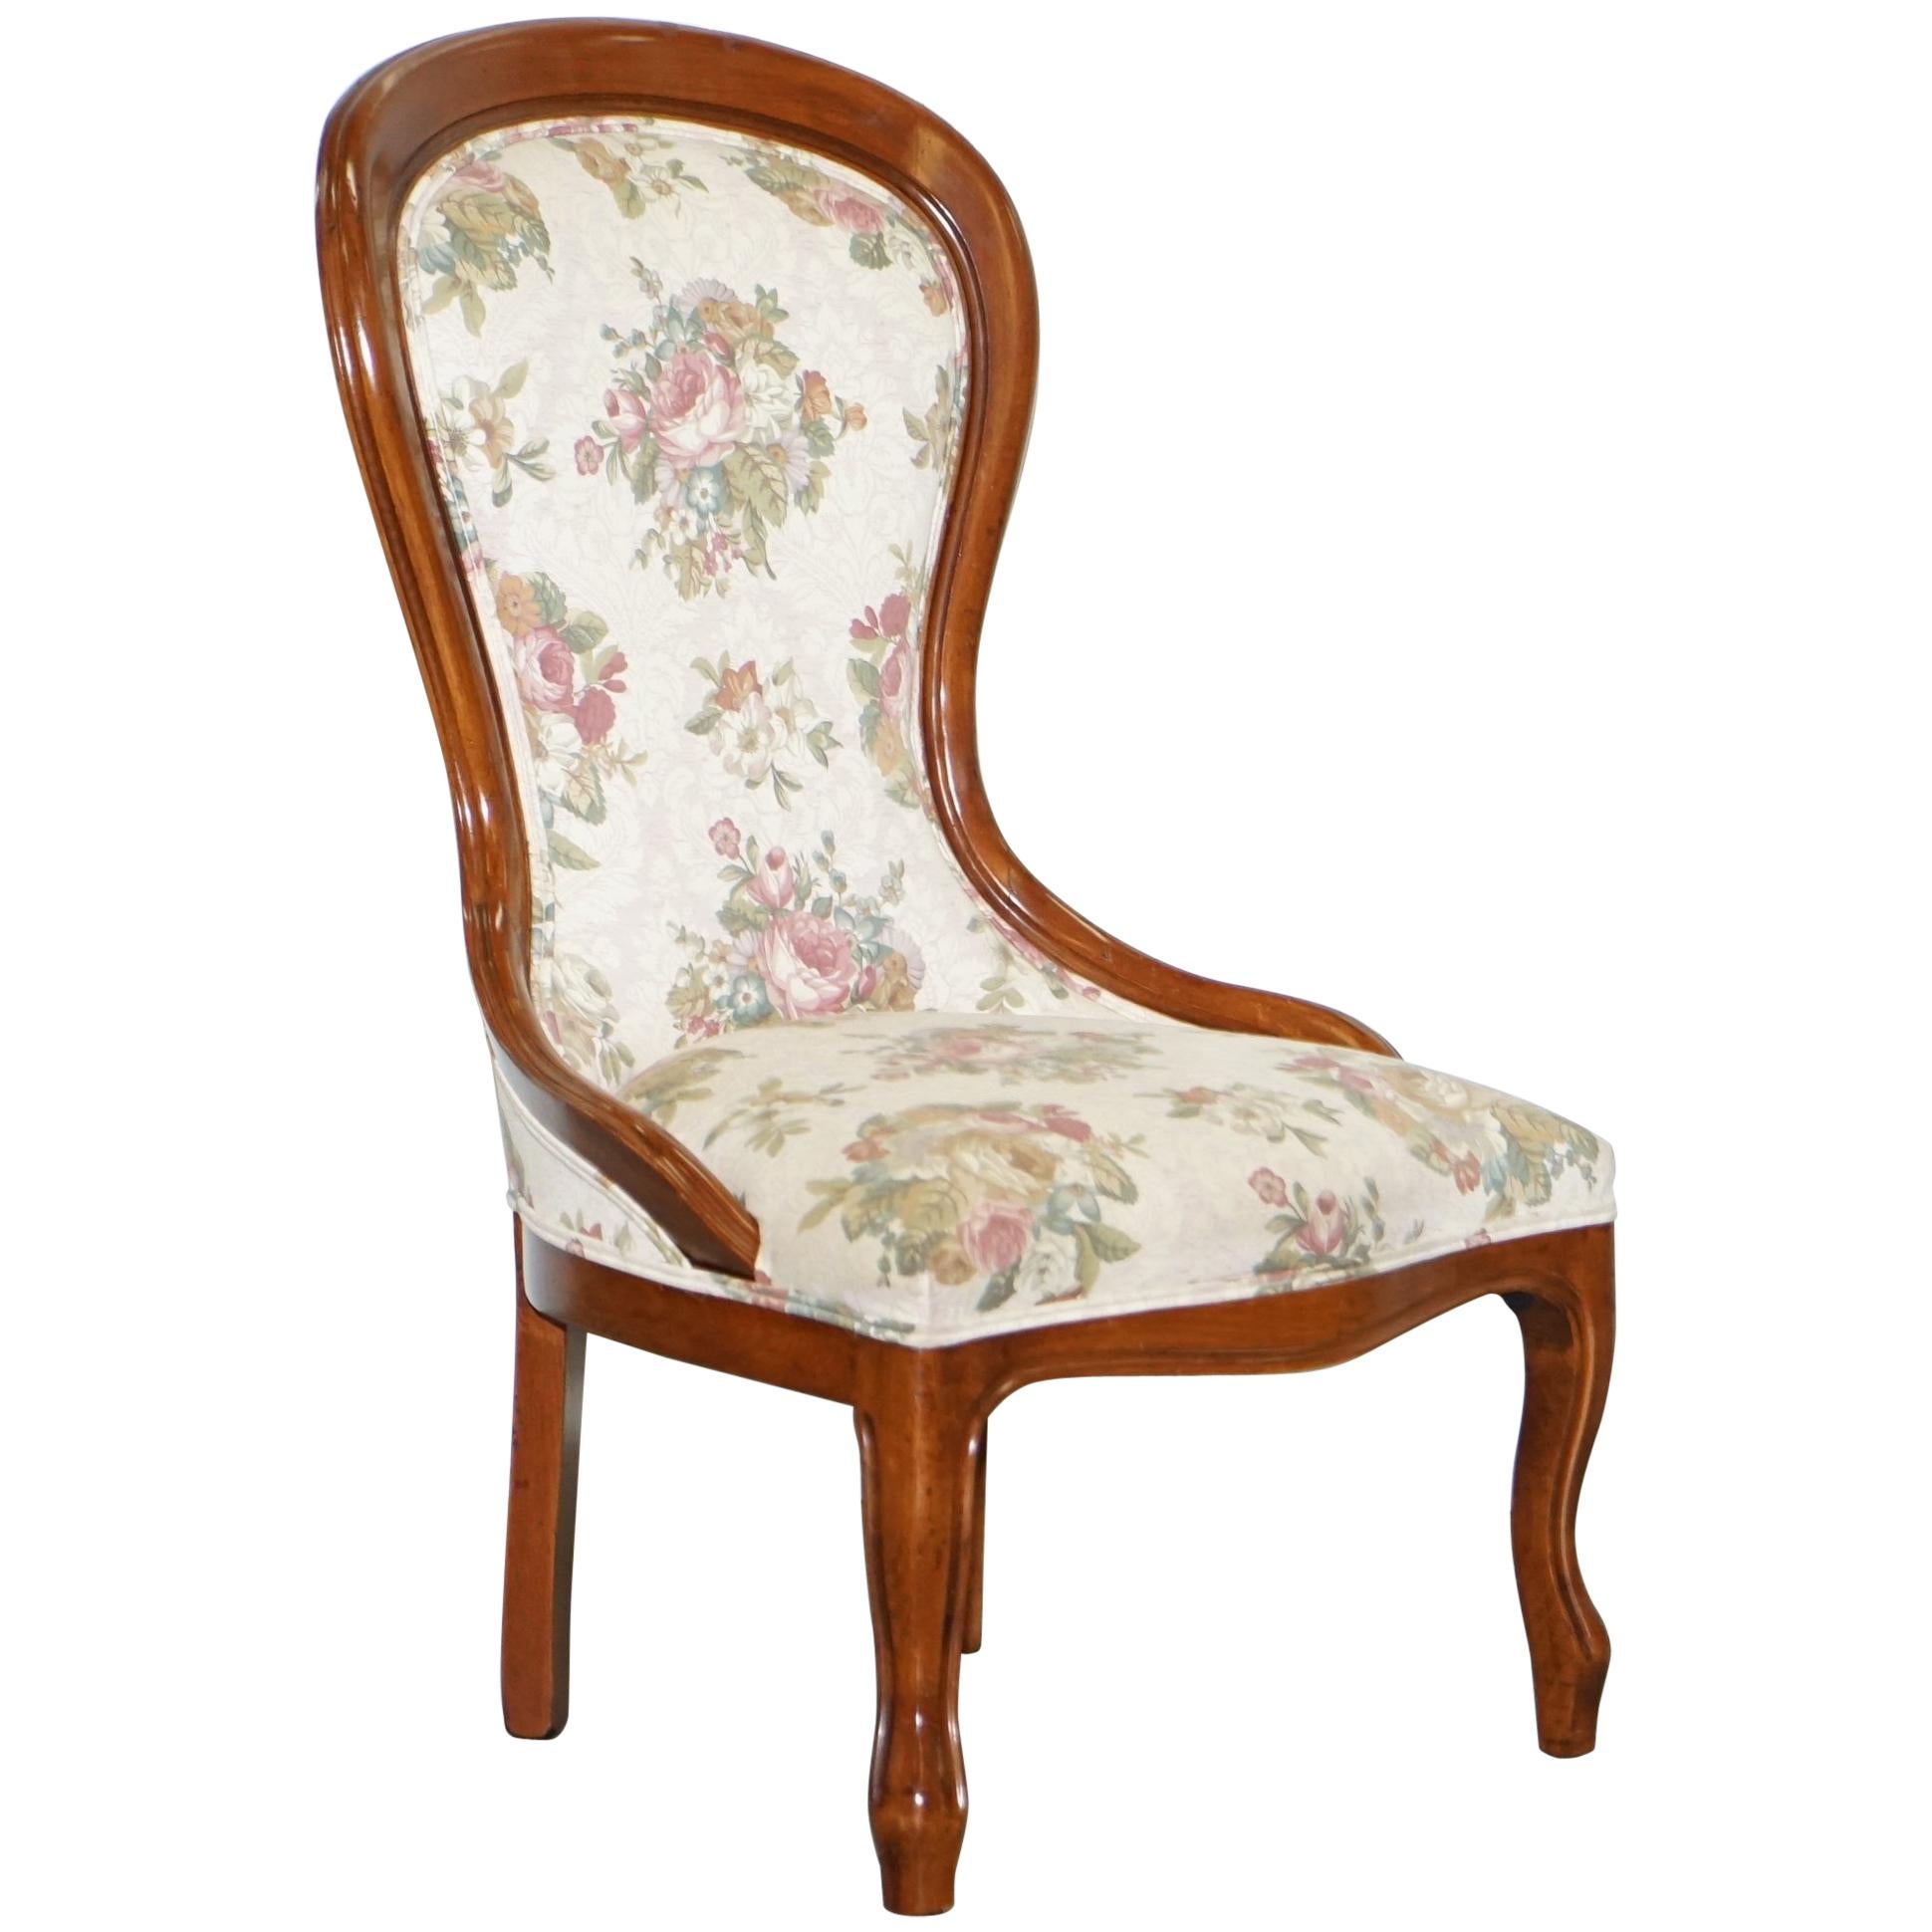 Lovely Victorian Walnut Framed with Floral Upholstery Nursing Chair or Armchair